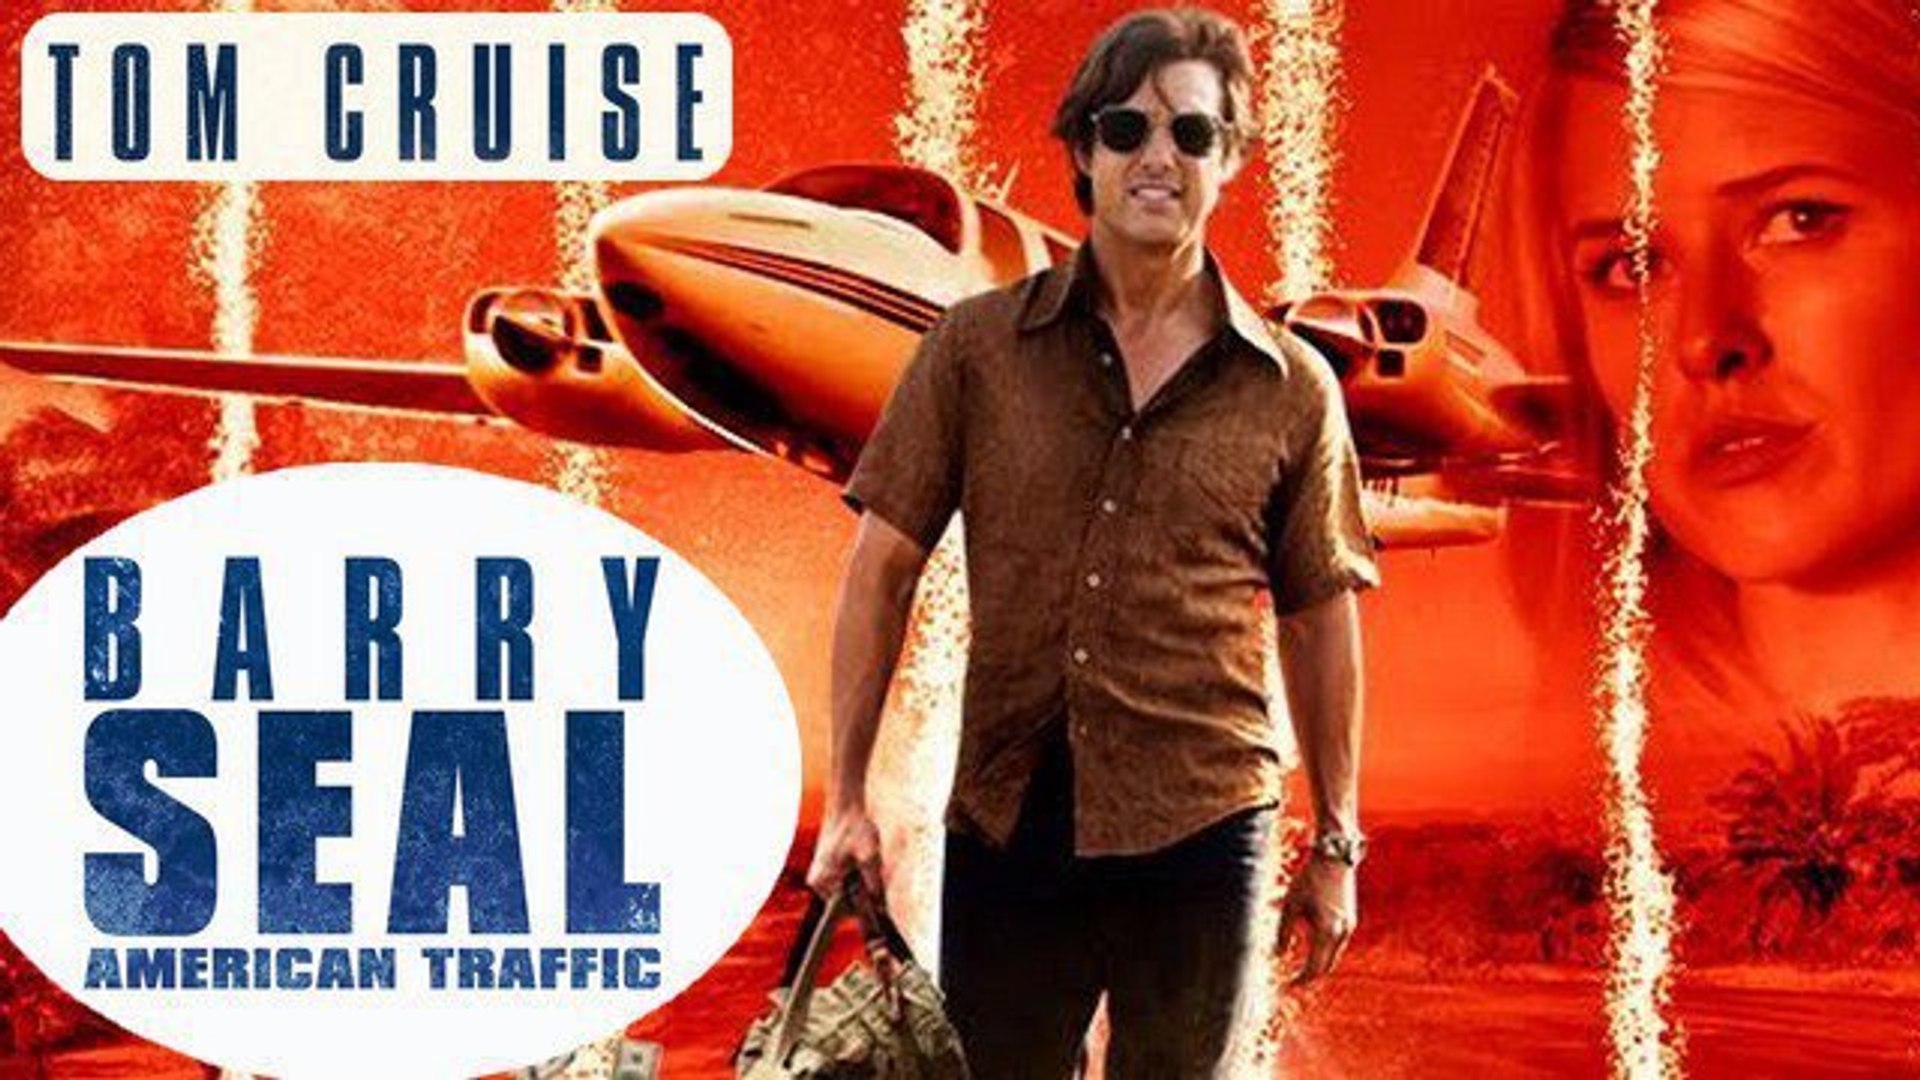 BARRY SEAL AMERICAN TRAFFIC Bande Annonce VF (Tom Cruise 2017) - Vidéo  Dailymotion